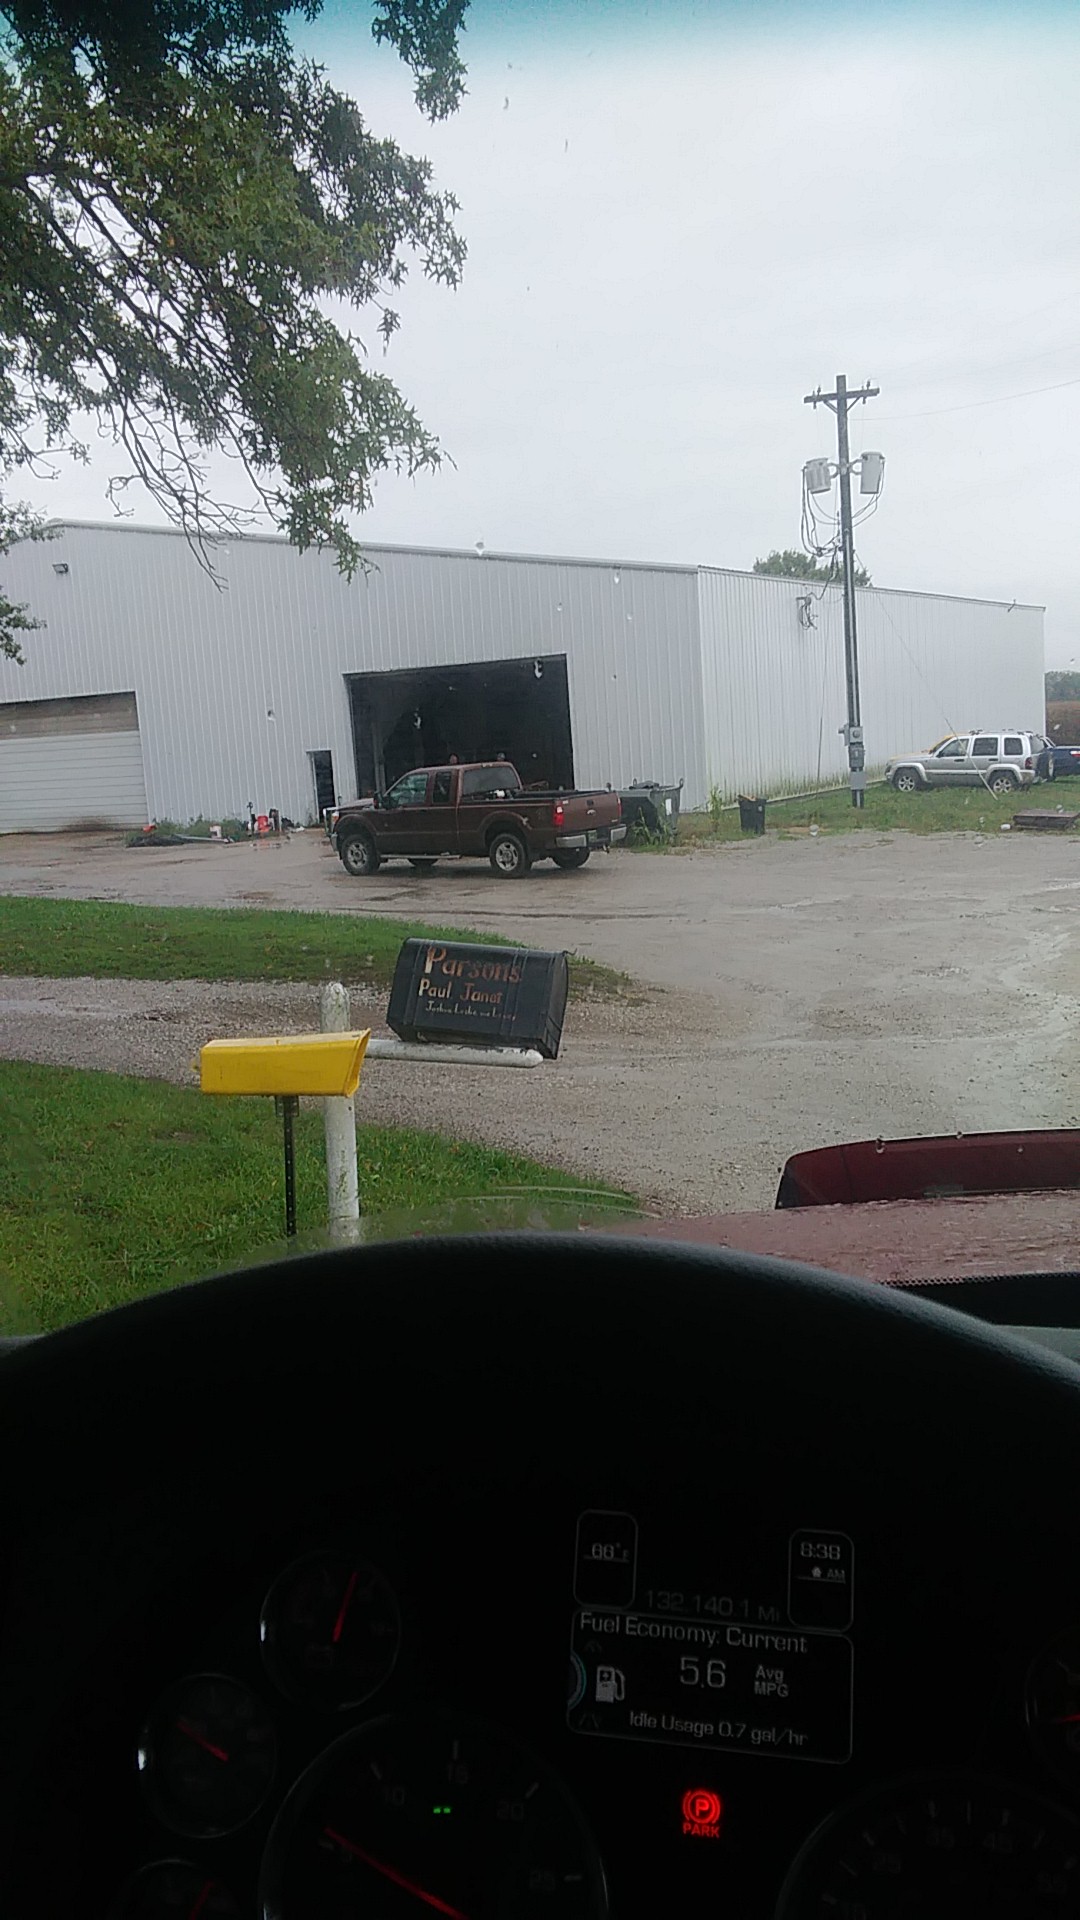 Parson's Farm & Seed Cleaning 3394 Isaac Miller Trail, Albany Missouri 64402